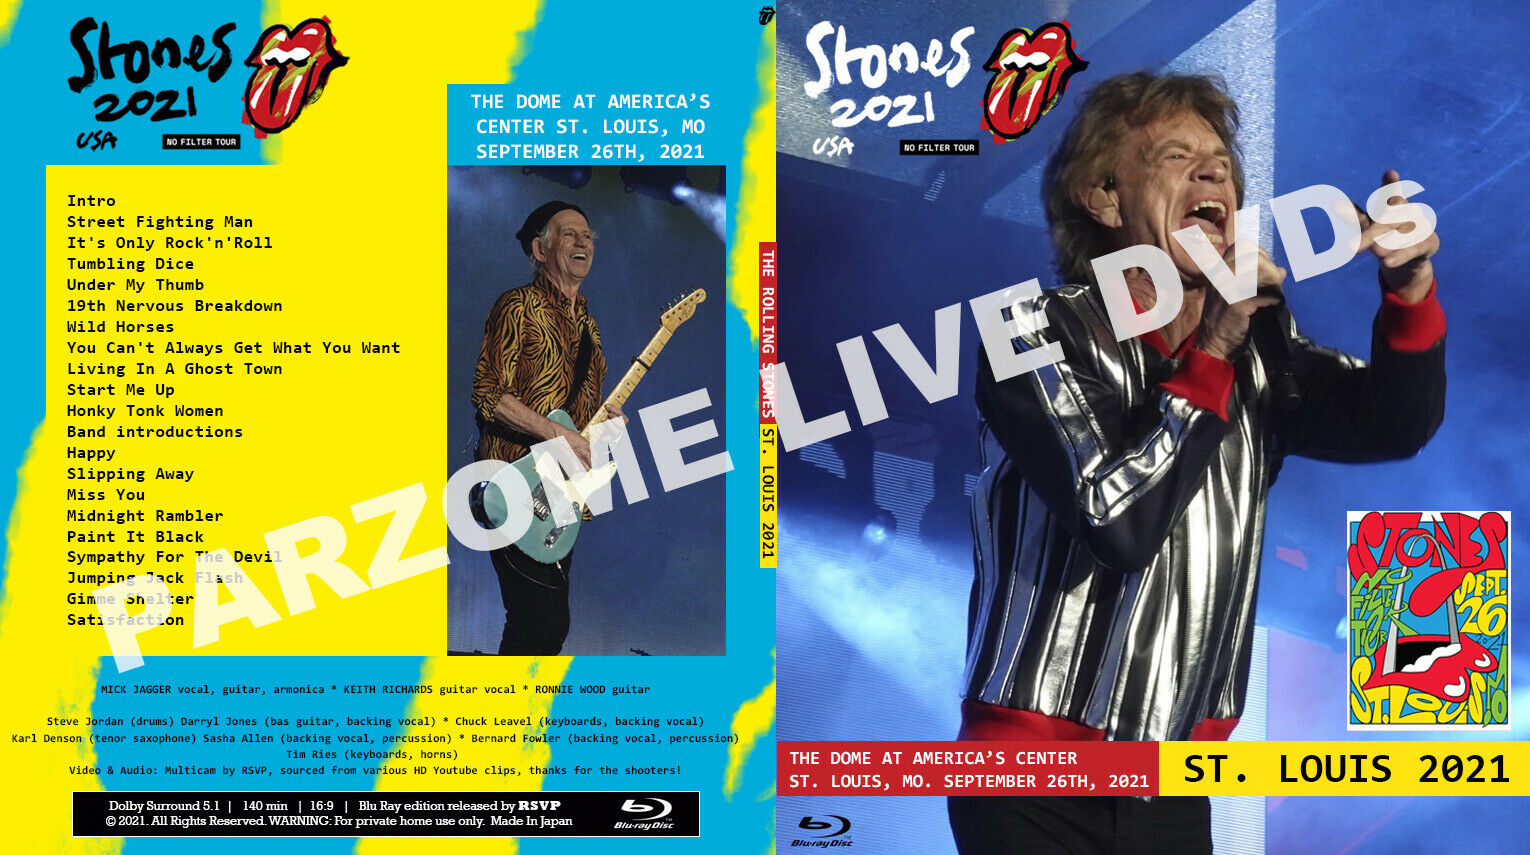 The Rolling Stones - St. Louis (No Filter Tour) 2021 Blu-Ray opening night!!